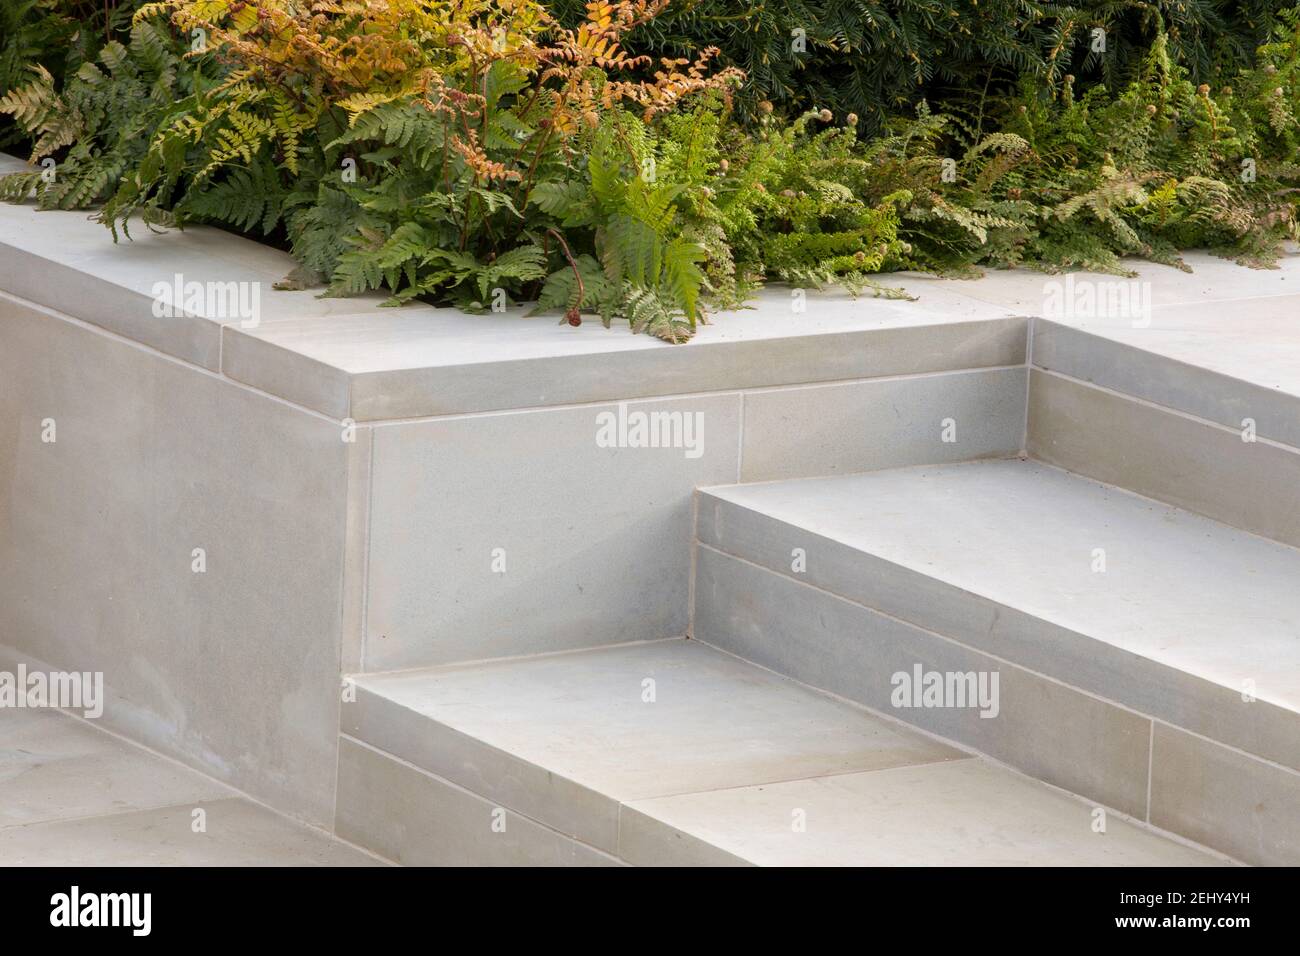 Large sawn white Yorkstone stone slab slabs paving paved steps and raised bed border borders planted with ferns - England GB UK Stock Photo